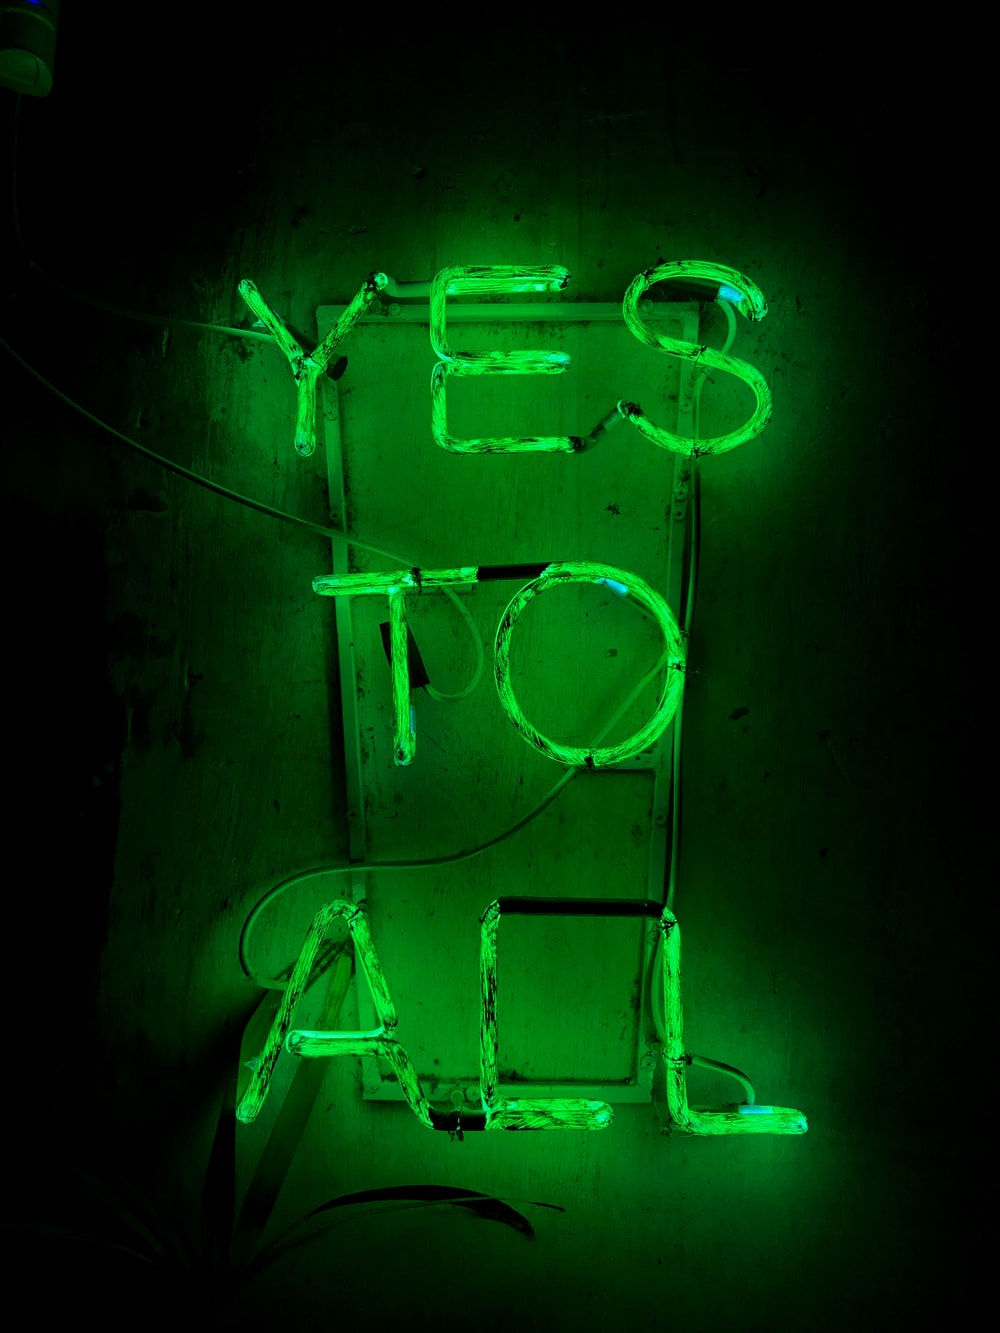 30000 Green Neon Sign Pictures Download Free Images on